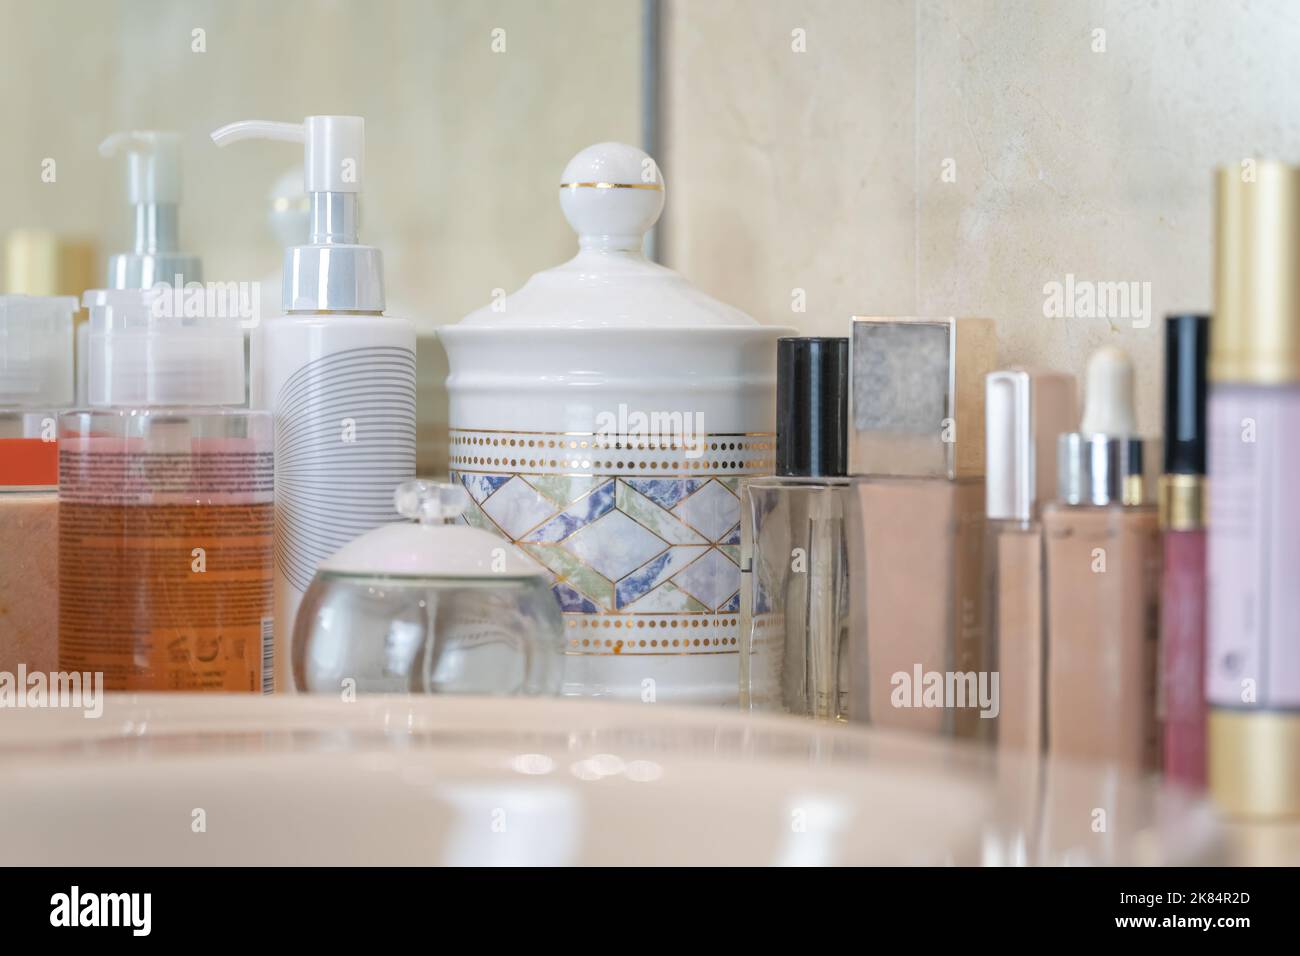 Set of skin care products, exposed on a bathroom shelf. Stock Photo